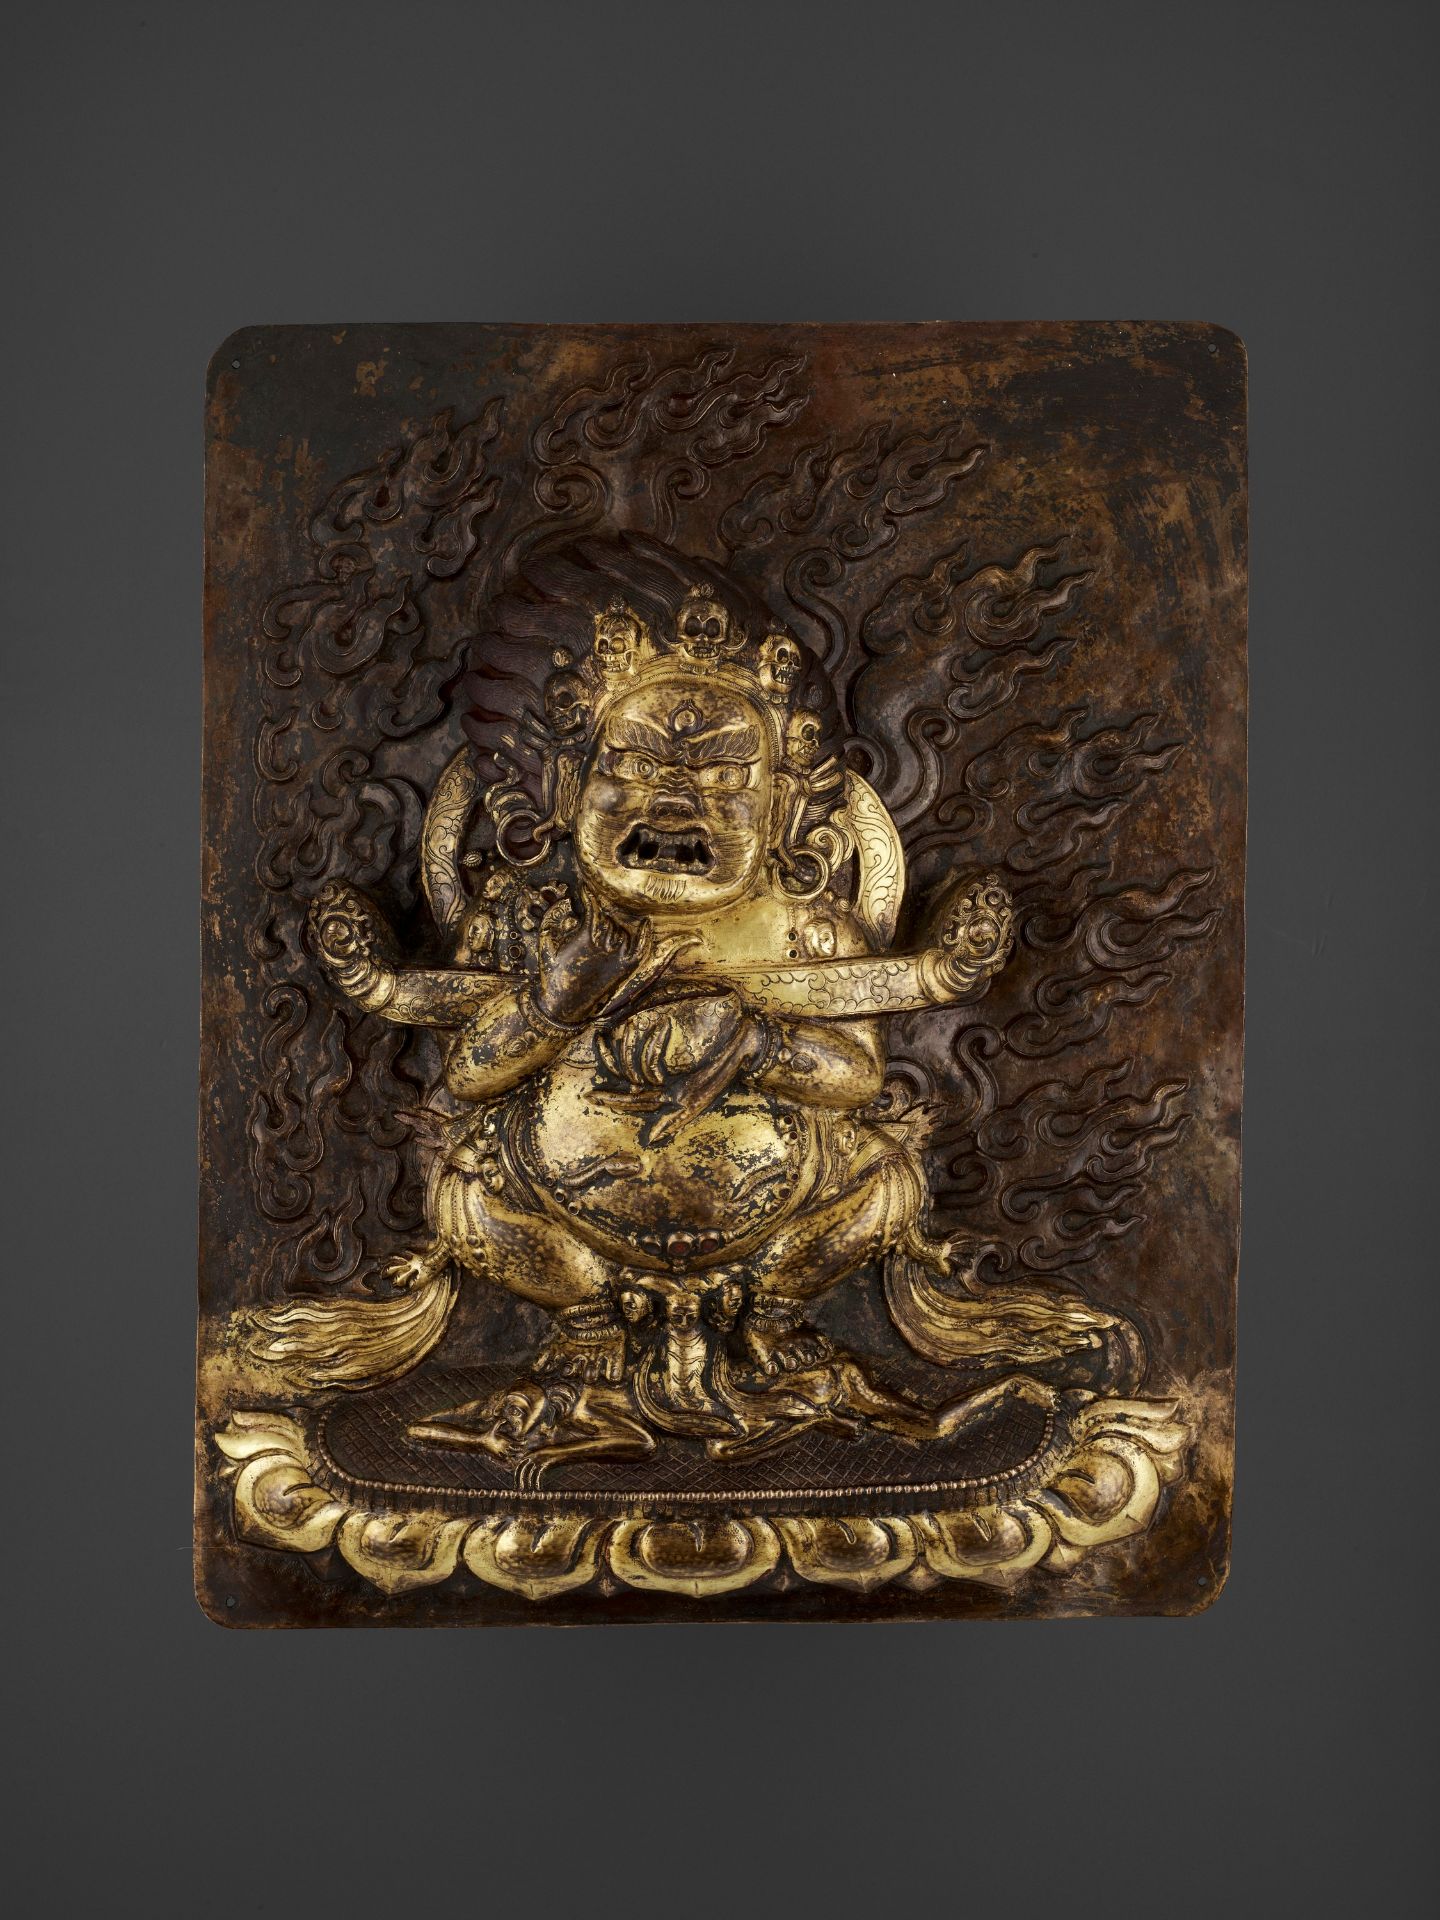 A LARGE GILT-COPPER REPOUSSE RELIEF OF MAHAKALA, 18TH-19TH CENTURY